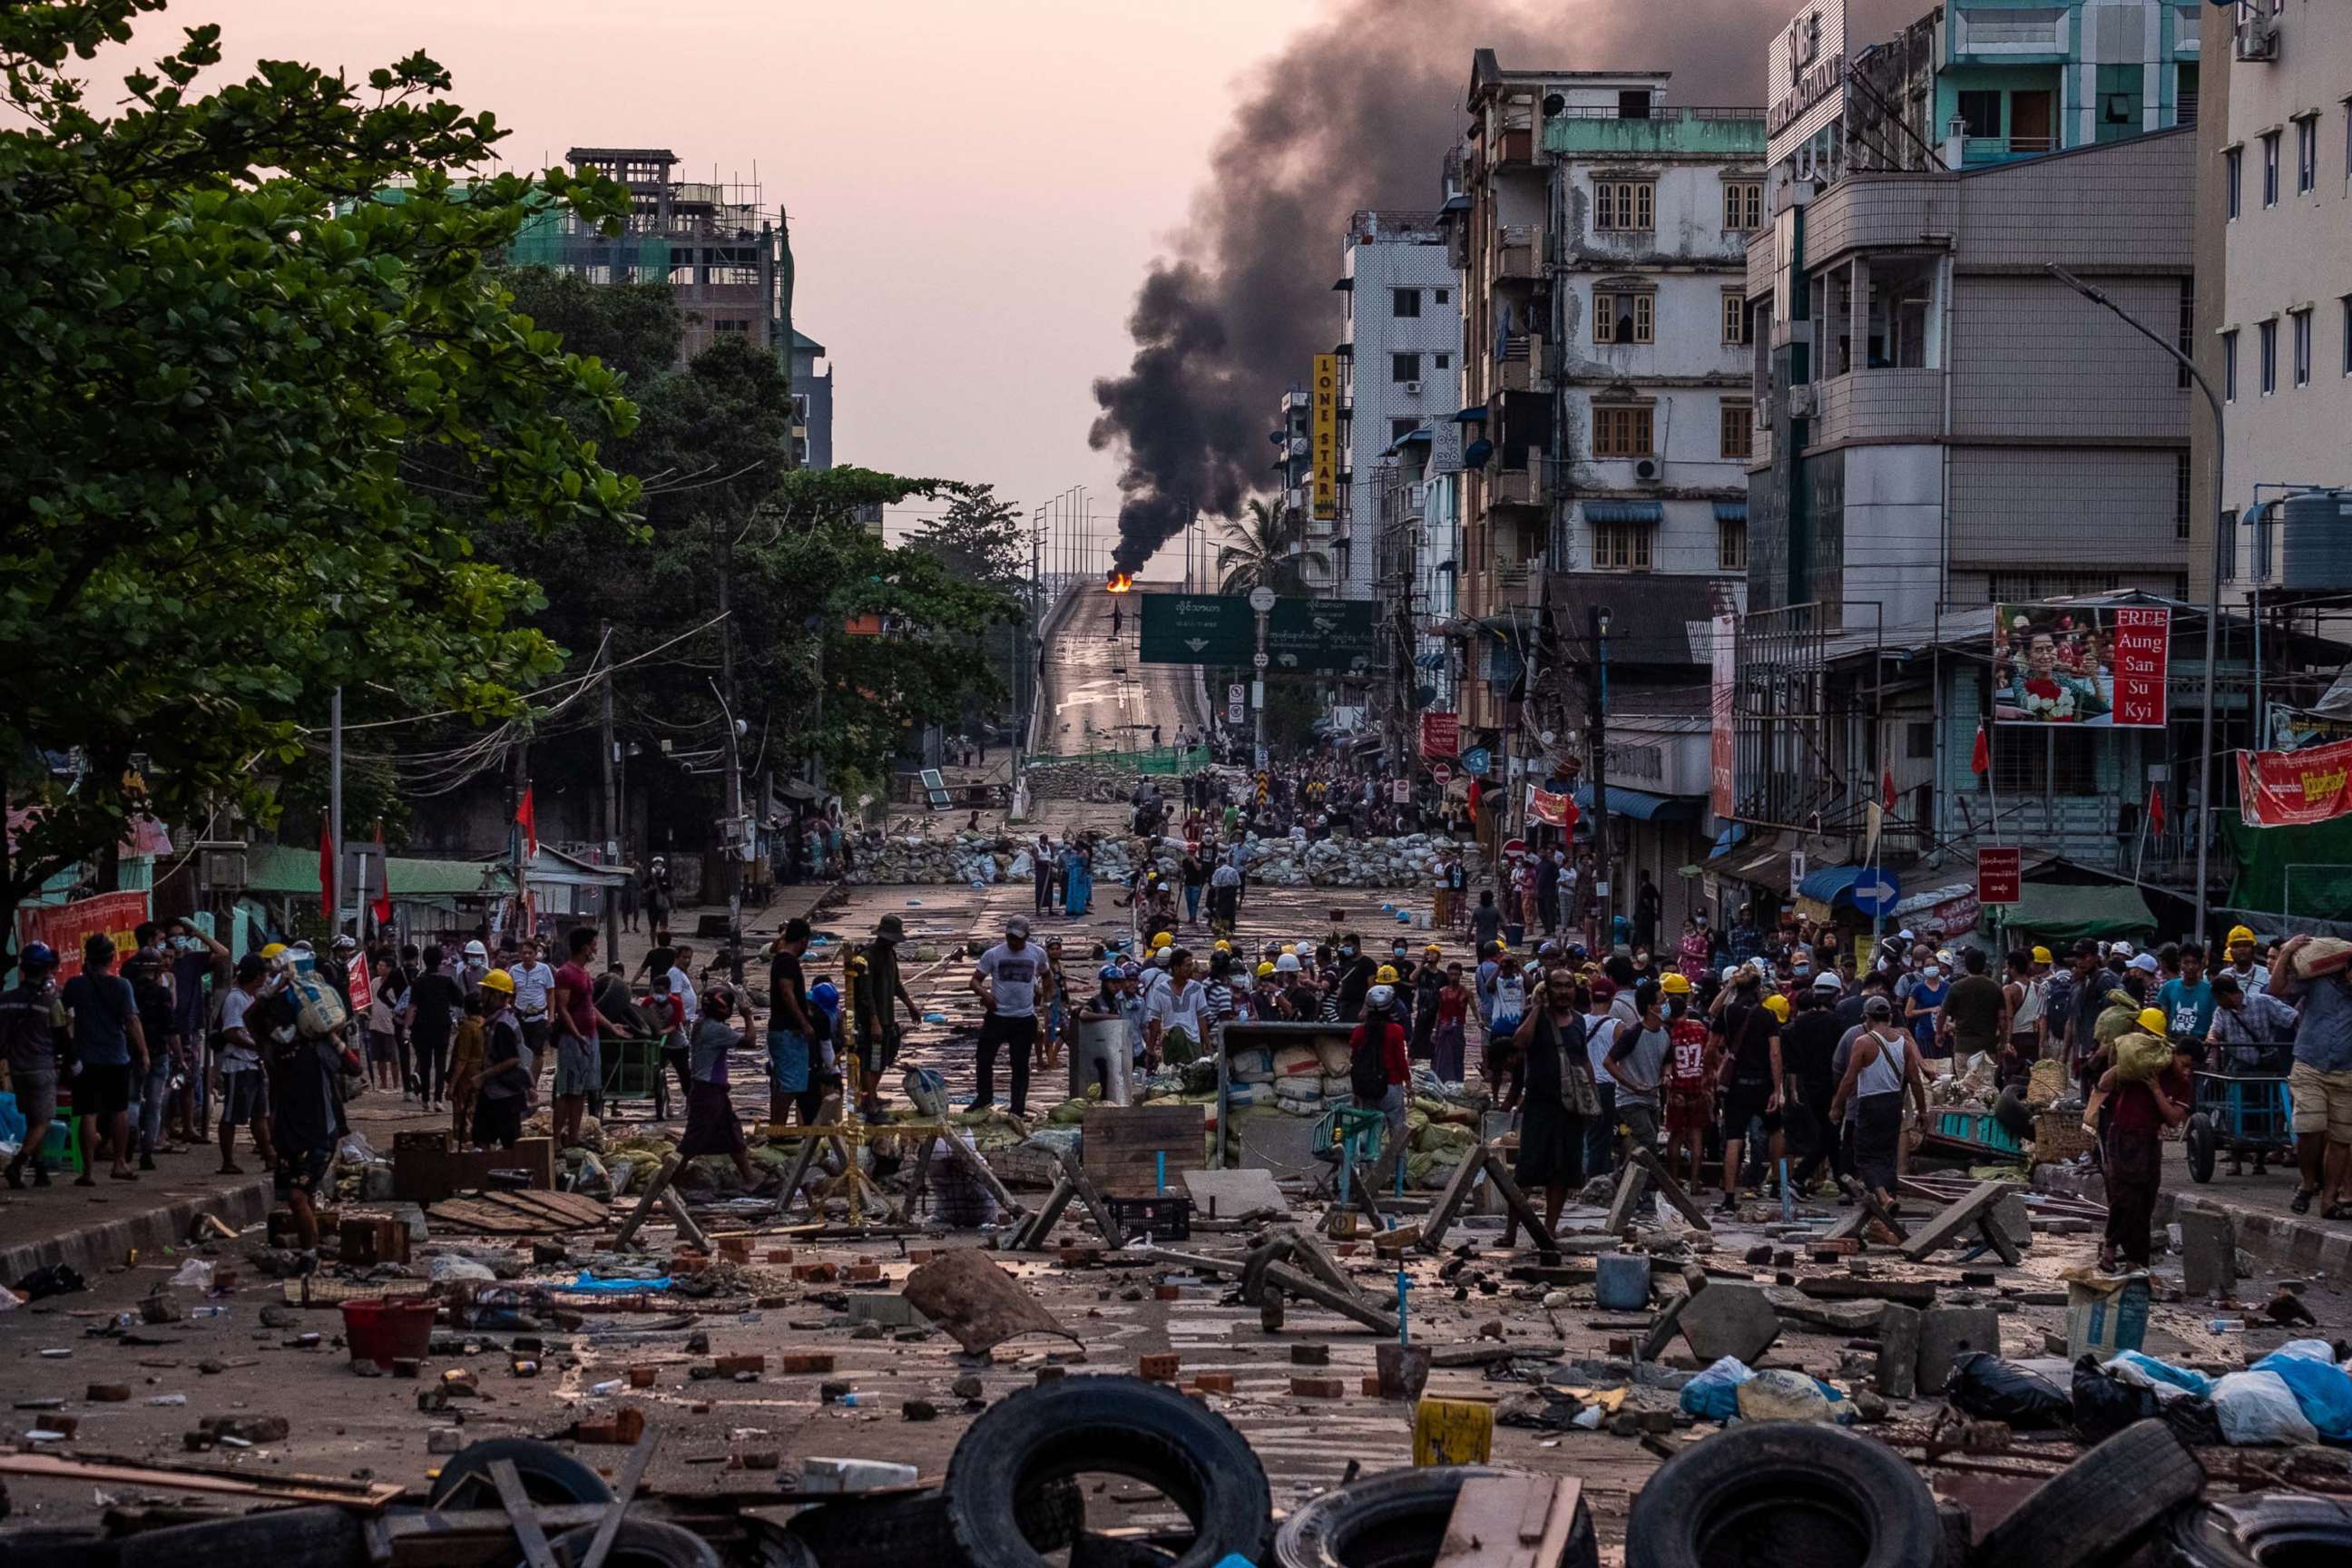 PHOTO: Smoke rises from tires burning at barricades erected by protesters after military junta forces attempted to breach them, March 16, 2021, in Yangon, Myanmar. 